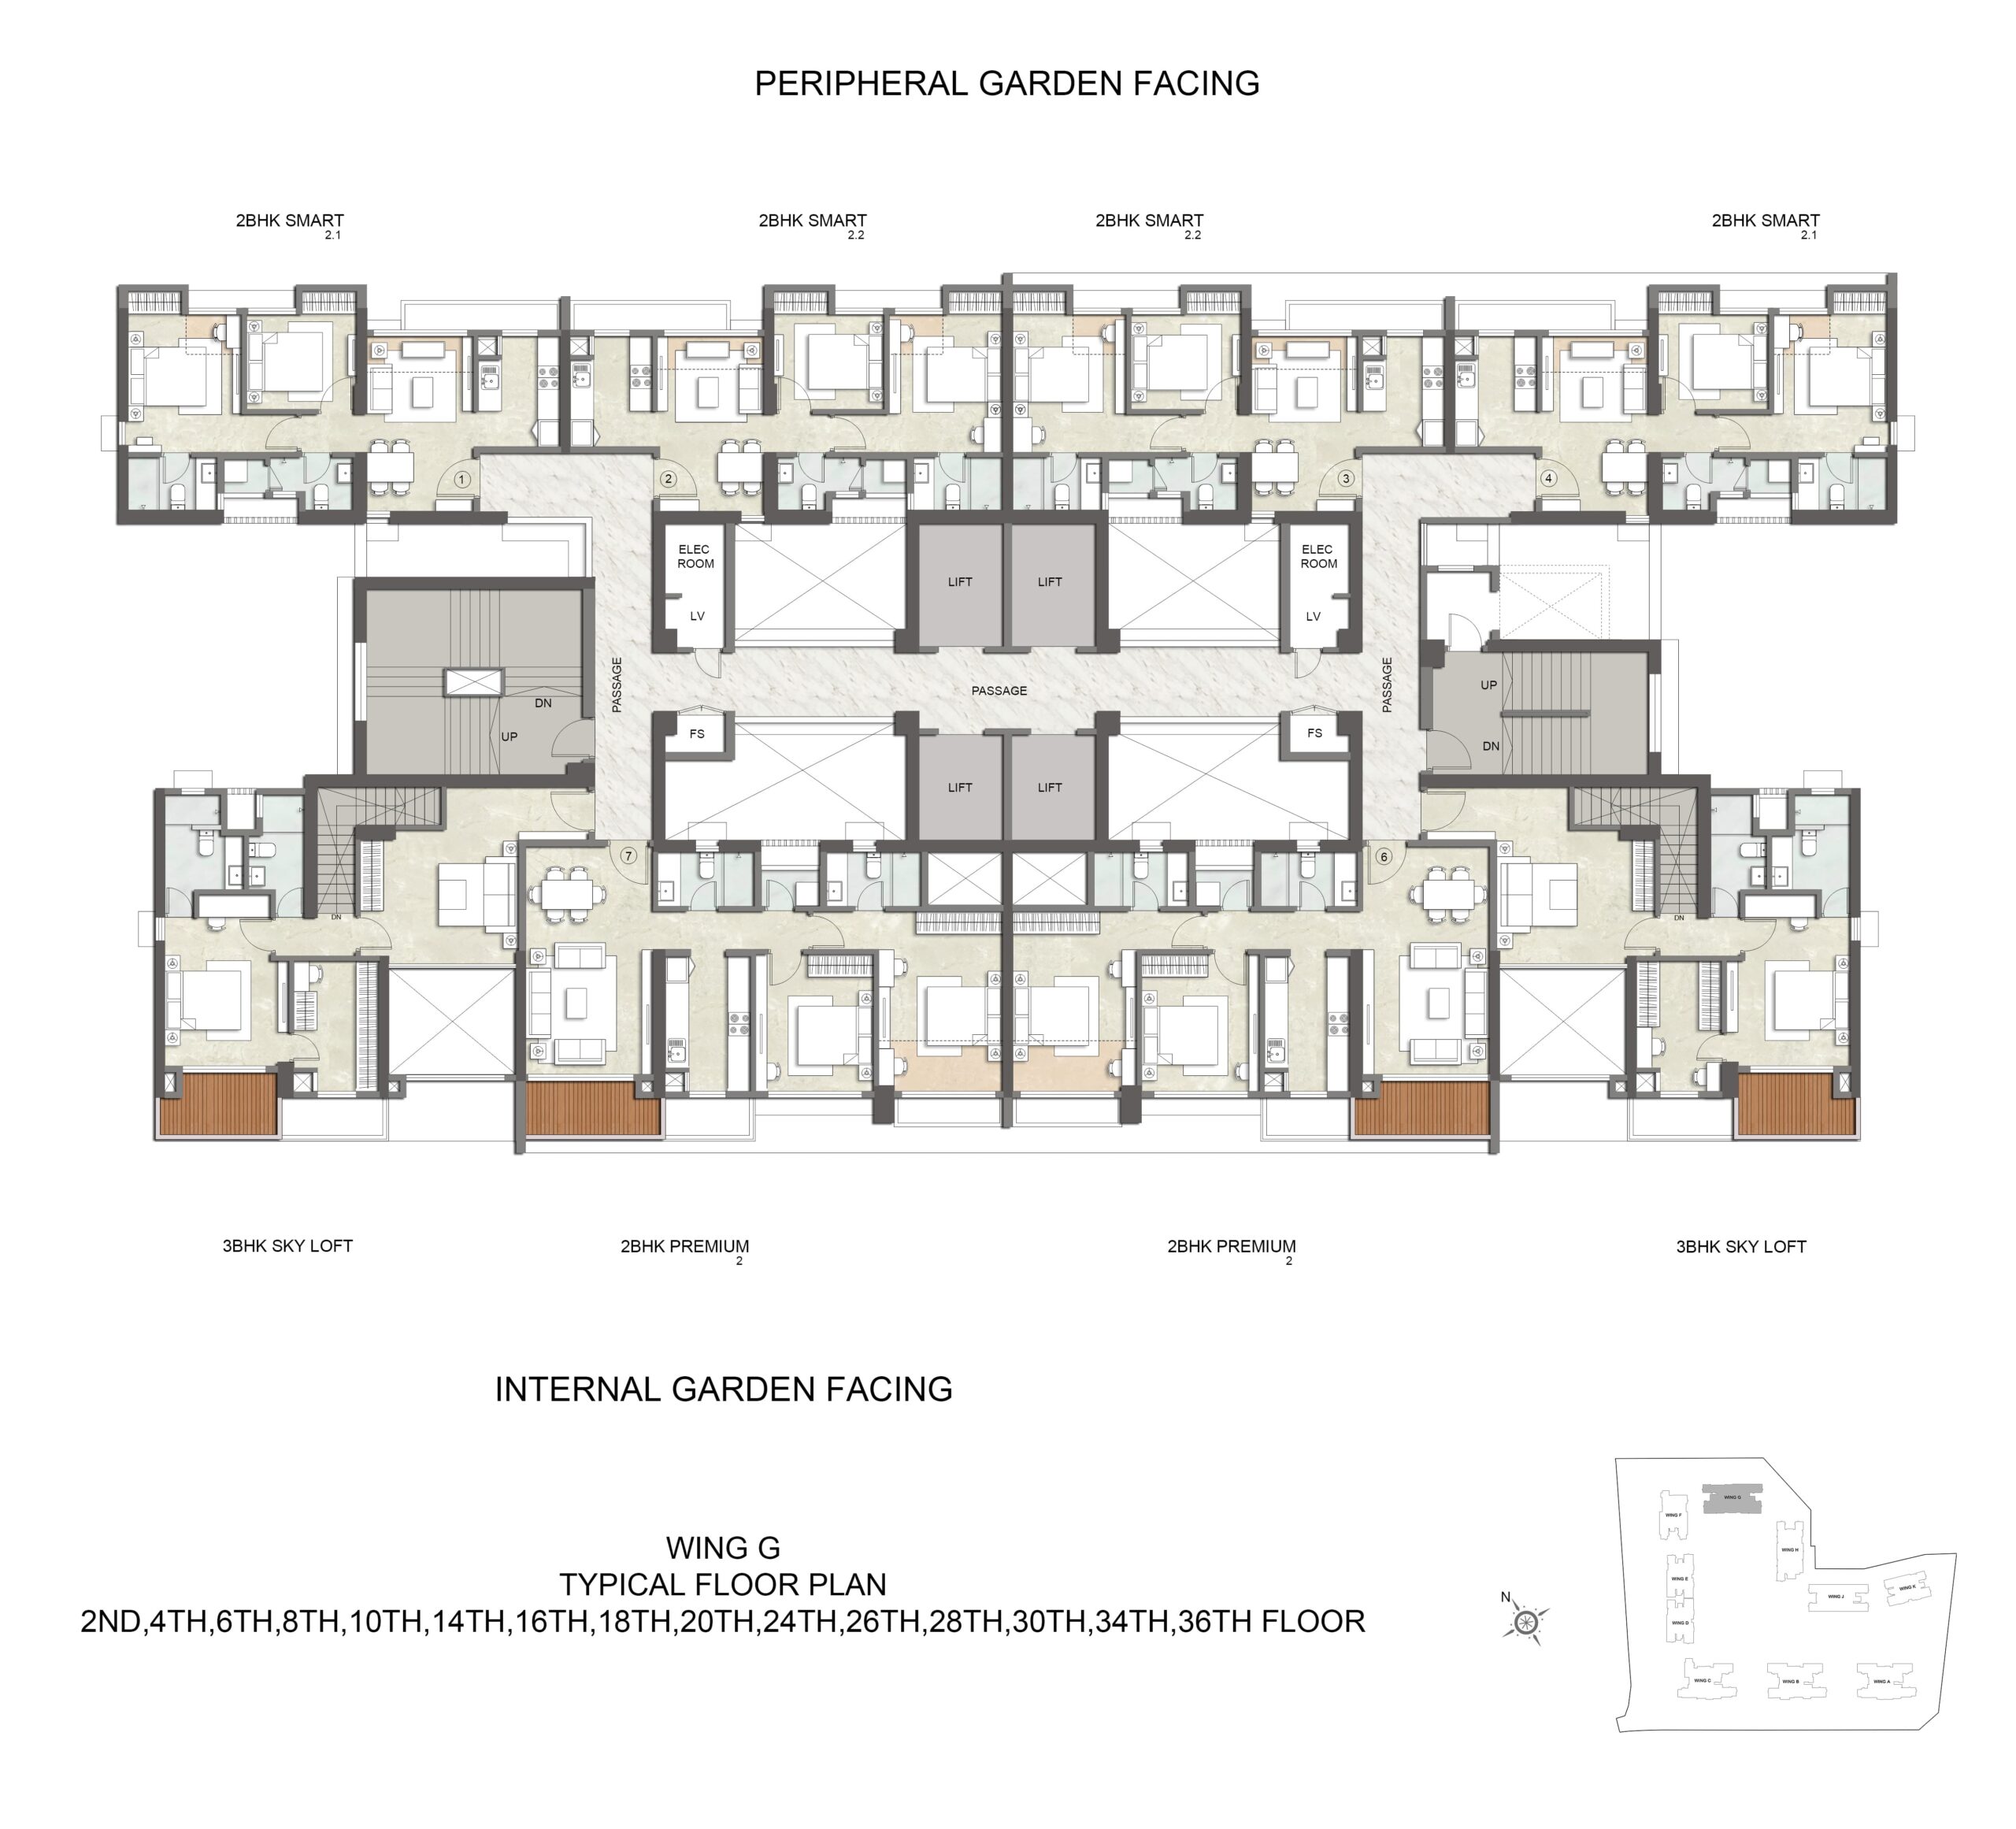 WING G_ TYPICAL FLOOR PLAN